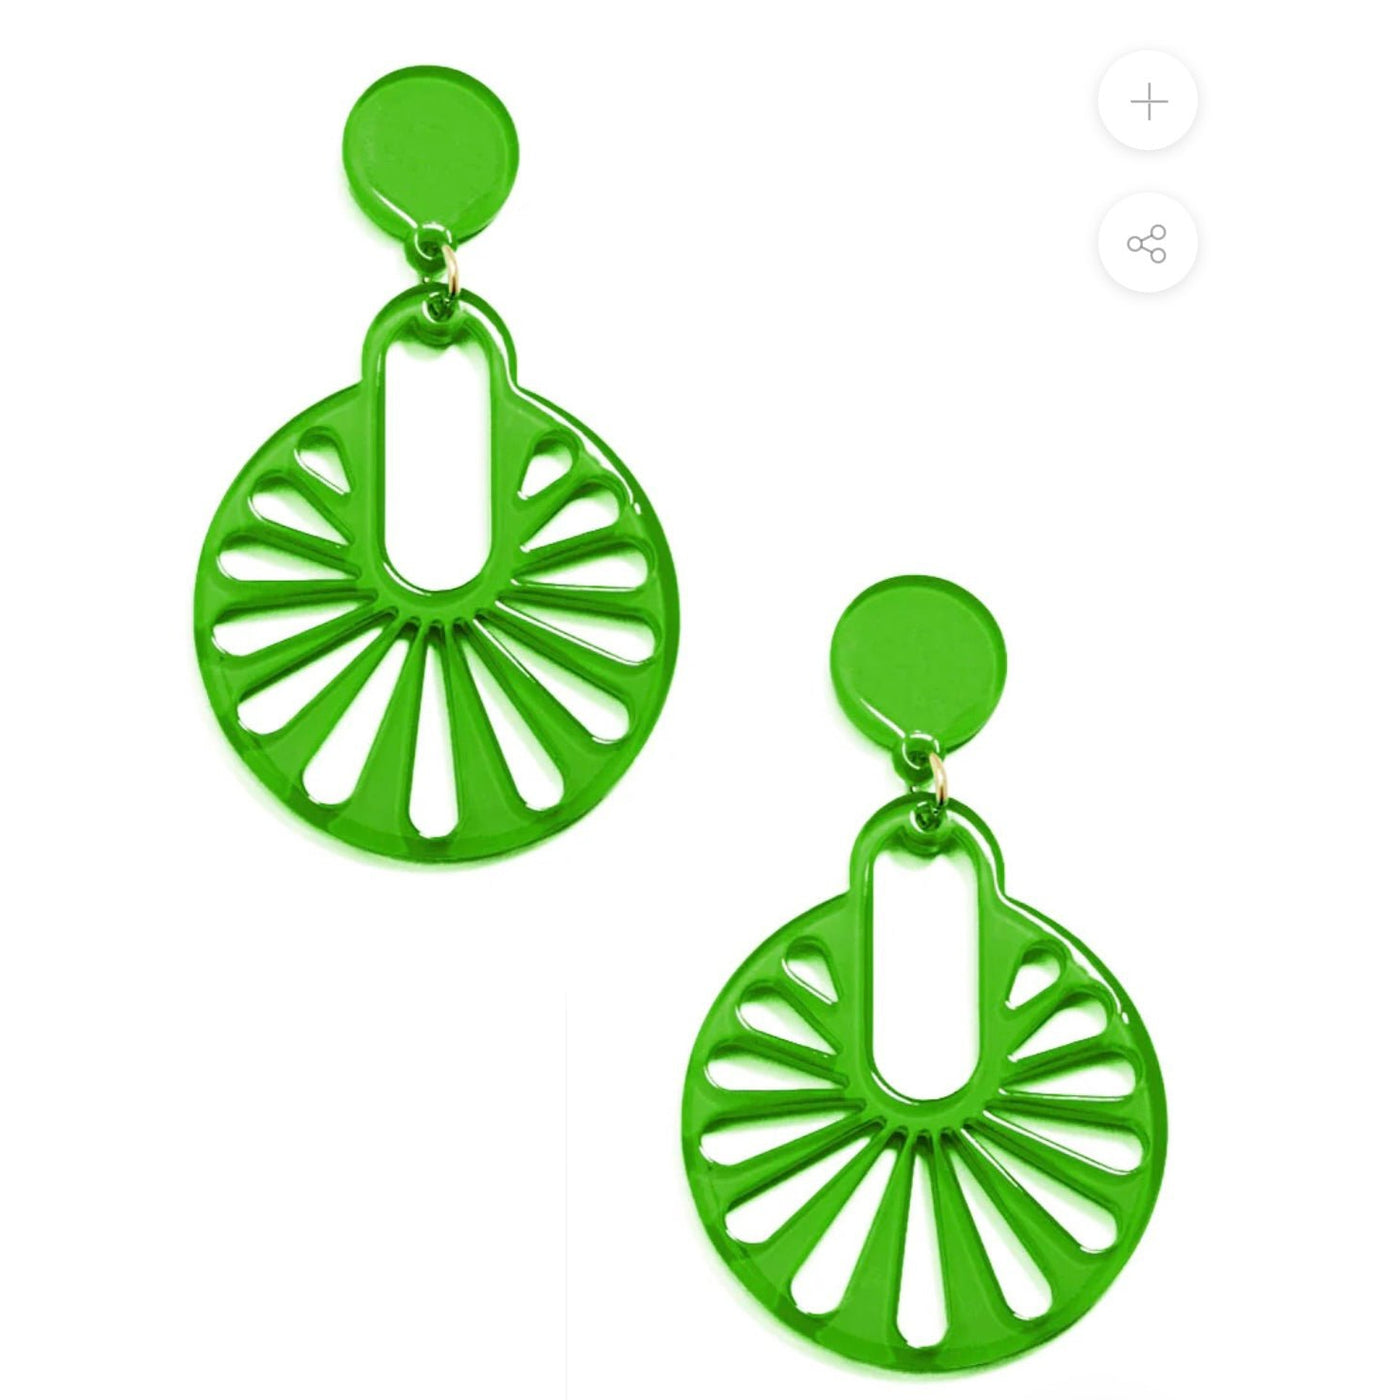 Resin Cutout Disk Earrings - Available in 6 Colors